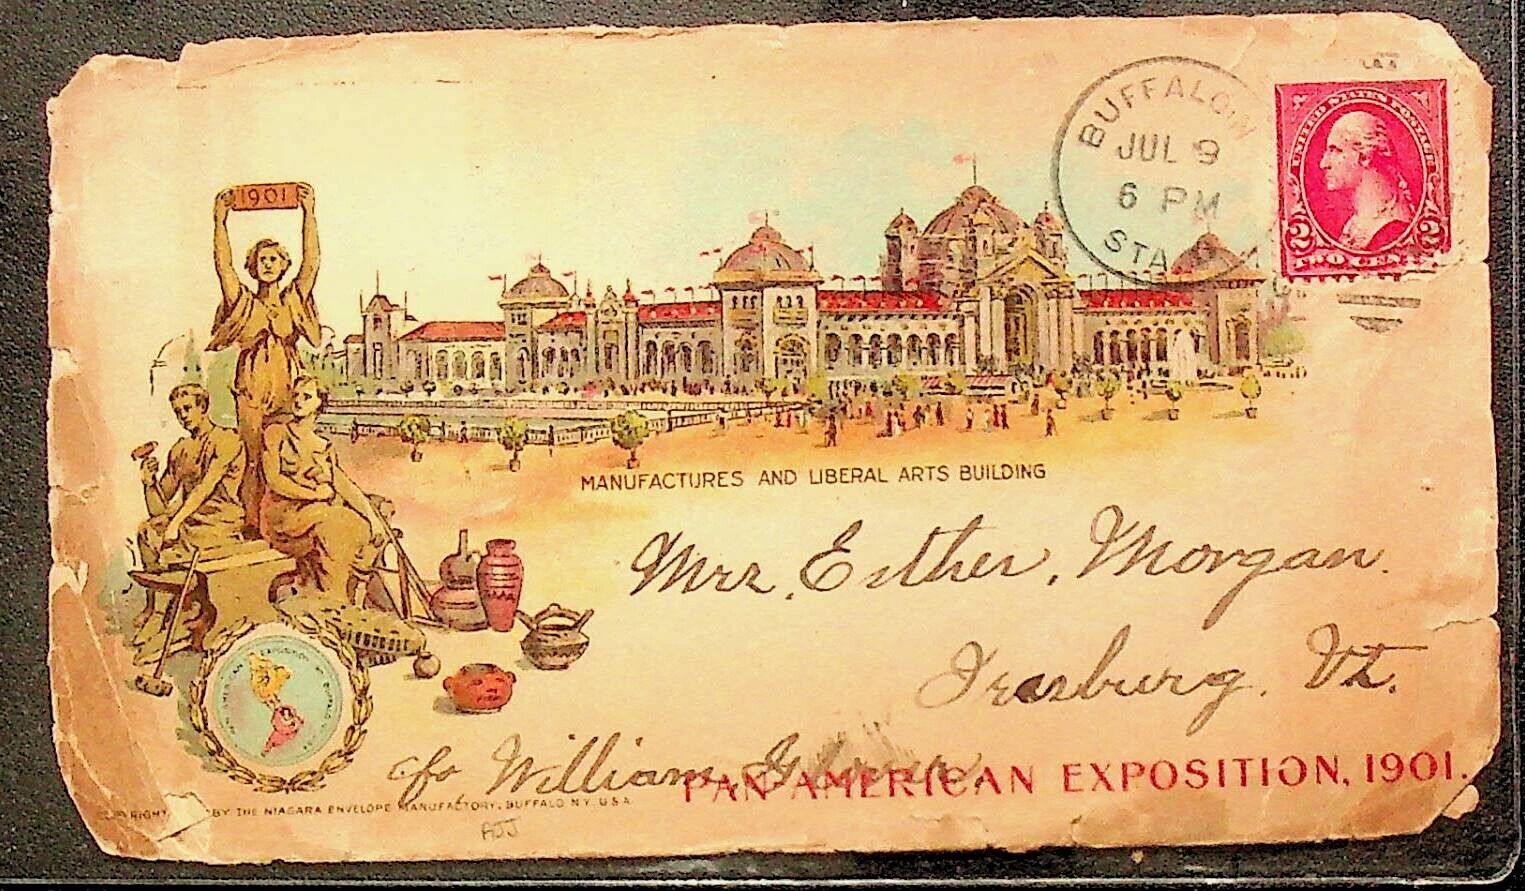 1901 Pan-American Exposition illustrated stamped envelope #167